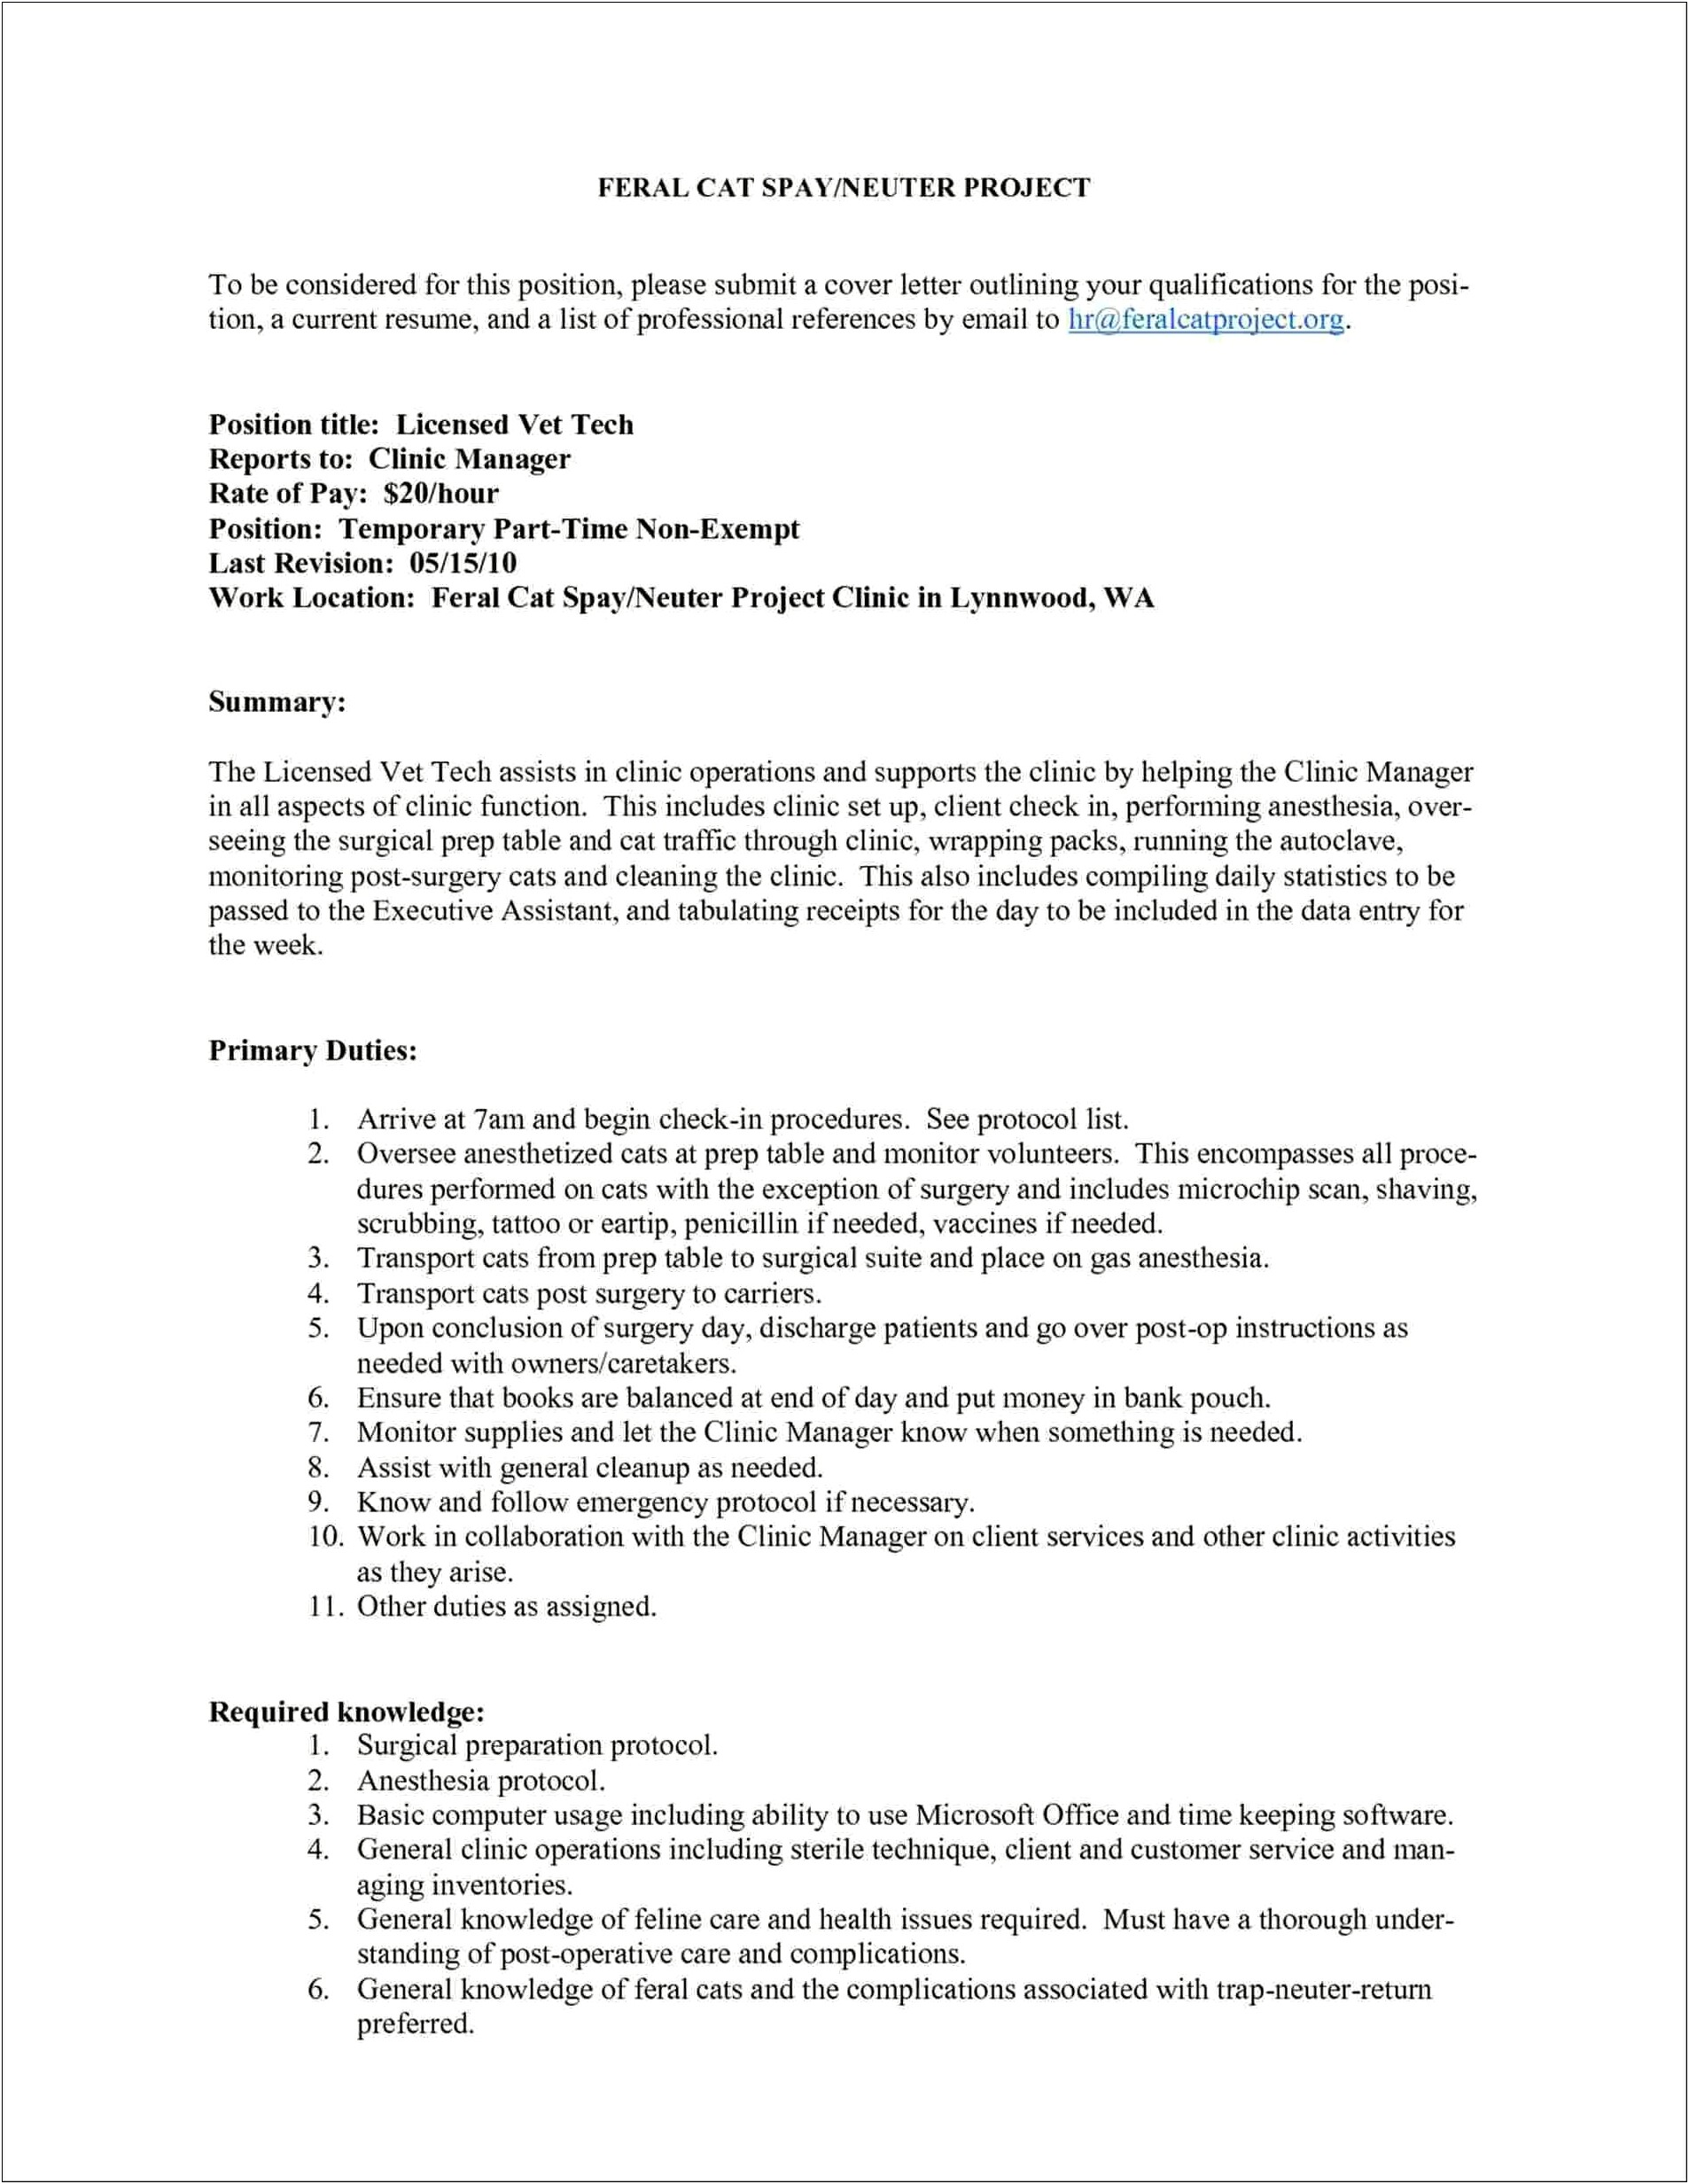 Emailing Cover Letter And Resume Salary Requirements References